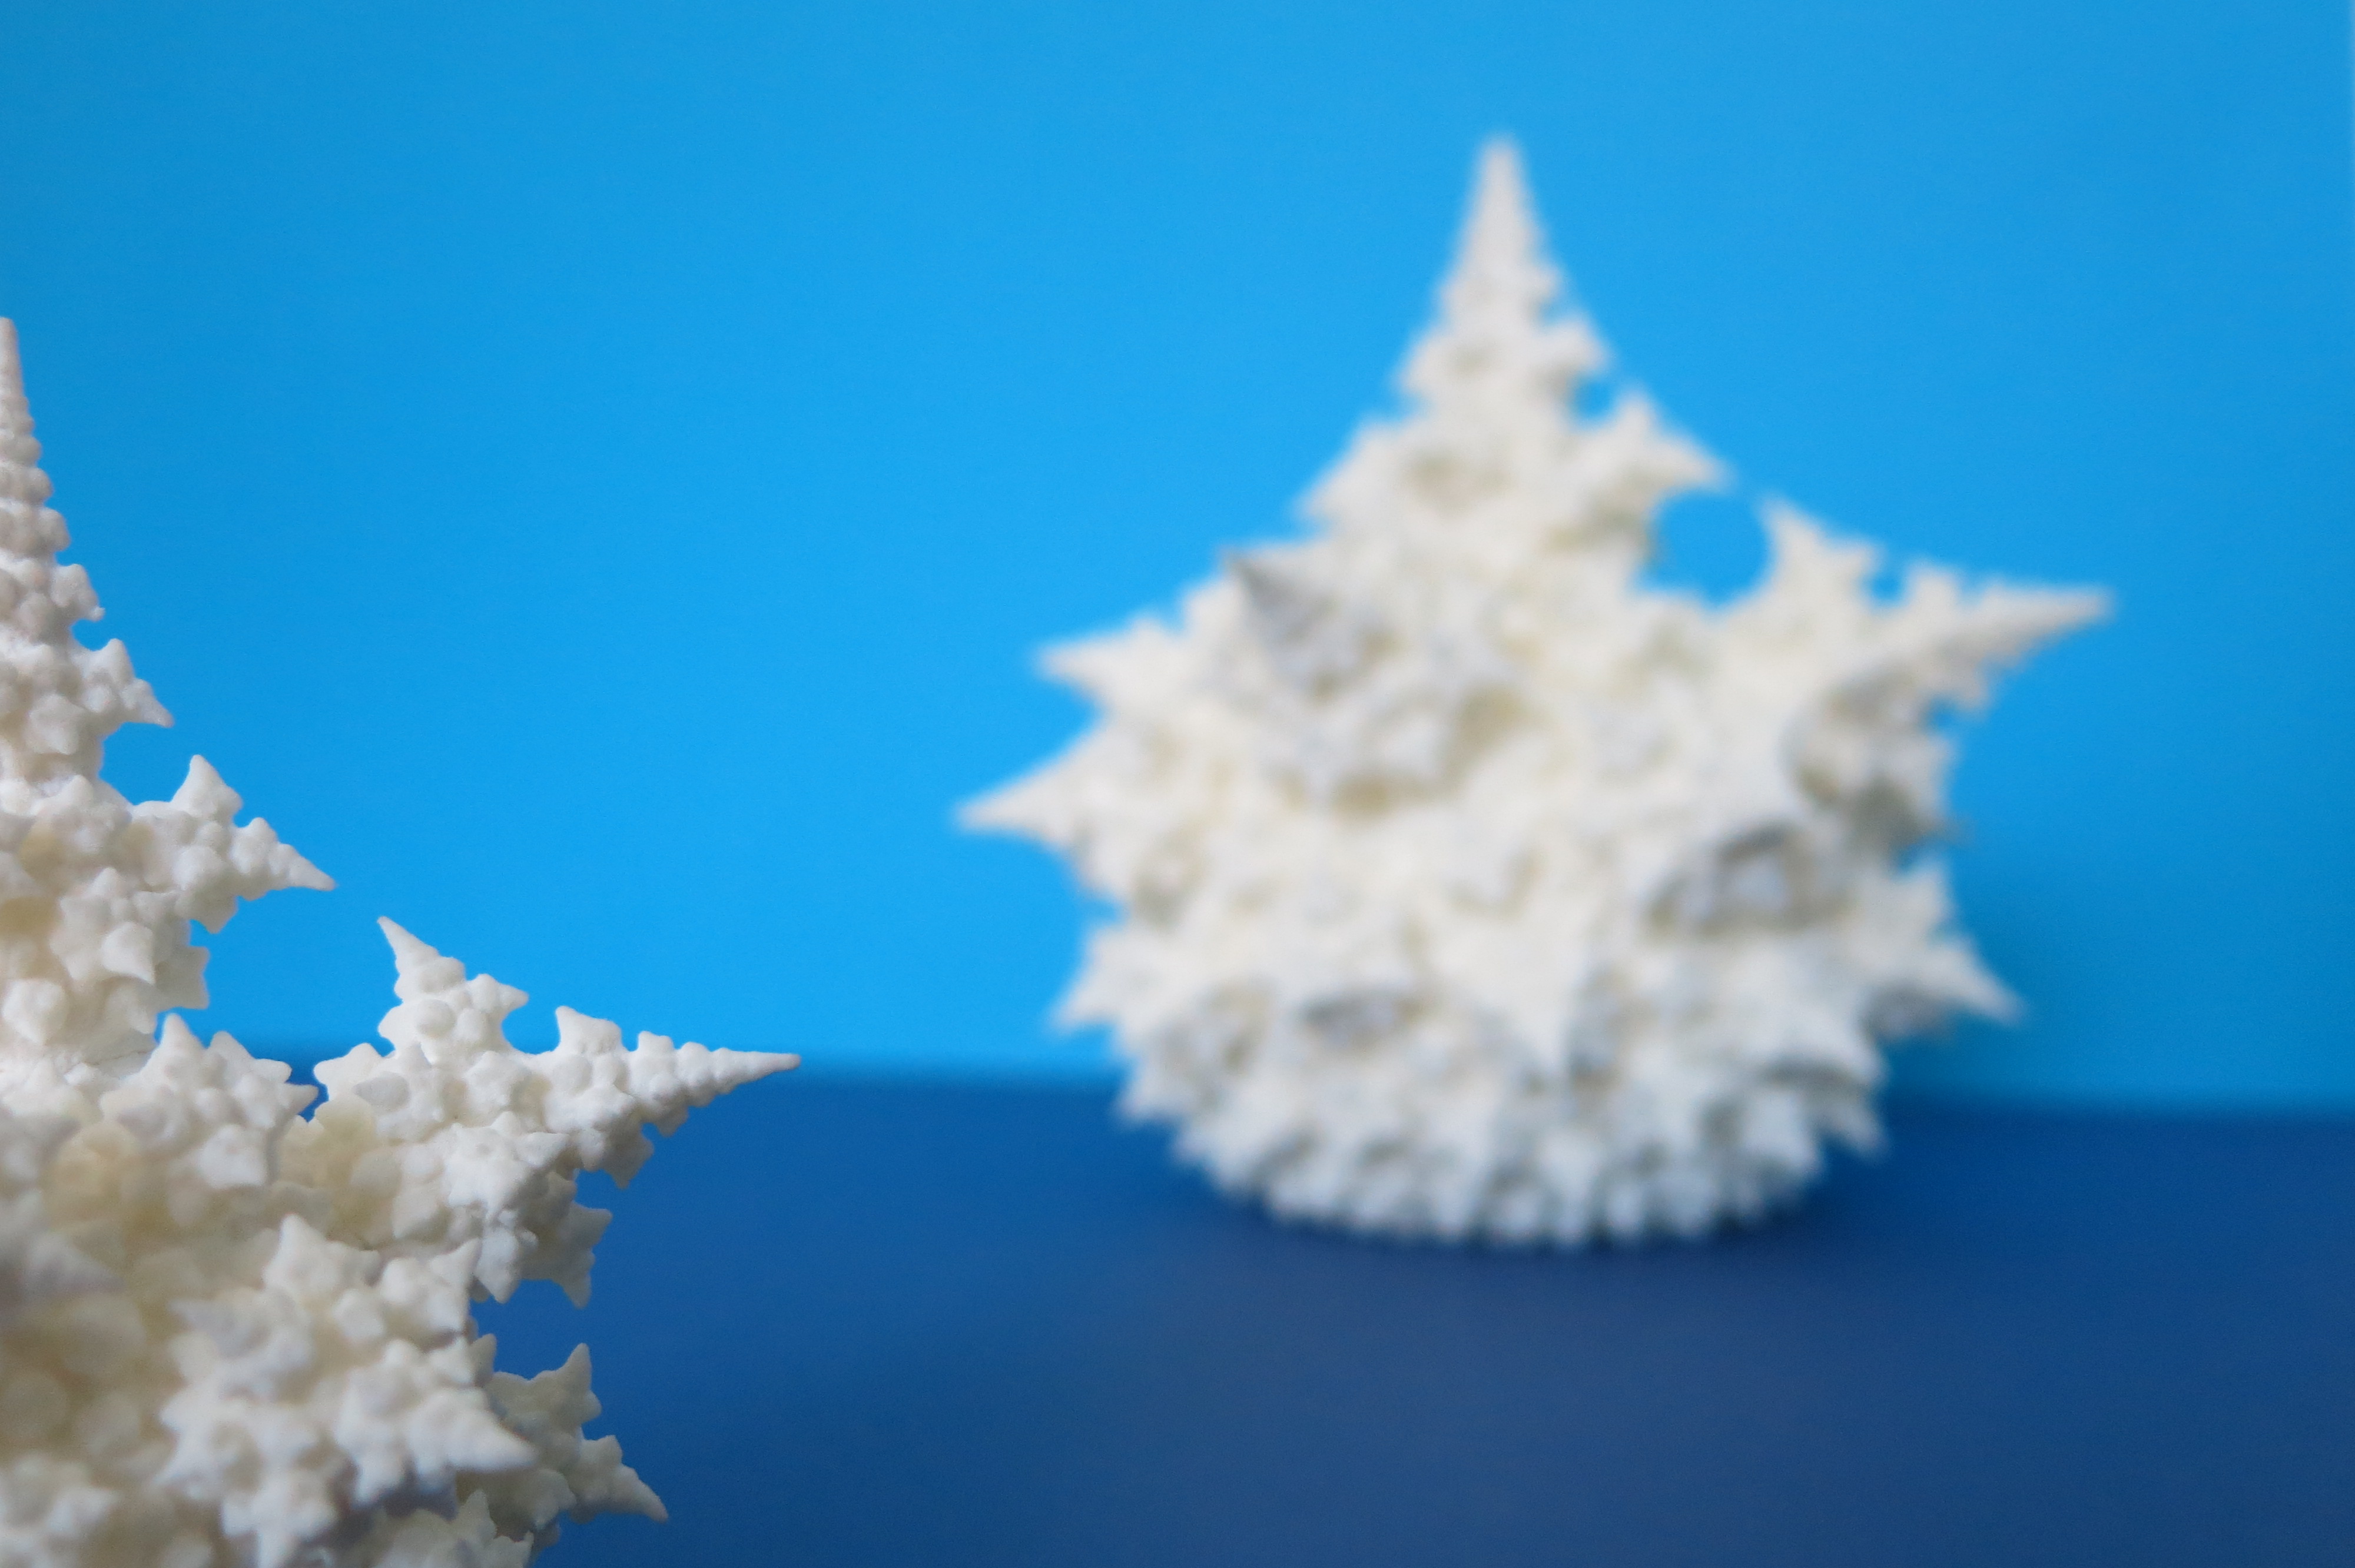 Cool 3D-printed mathematical objects | Sculpteo Blog